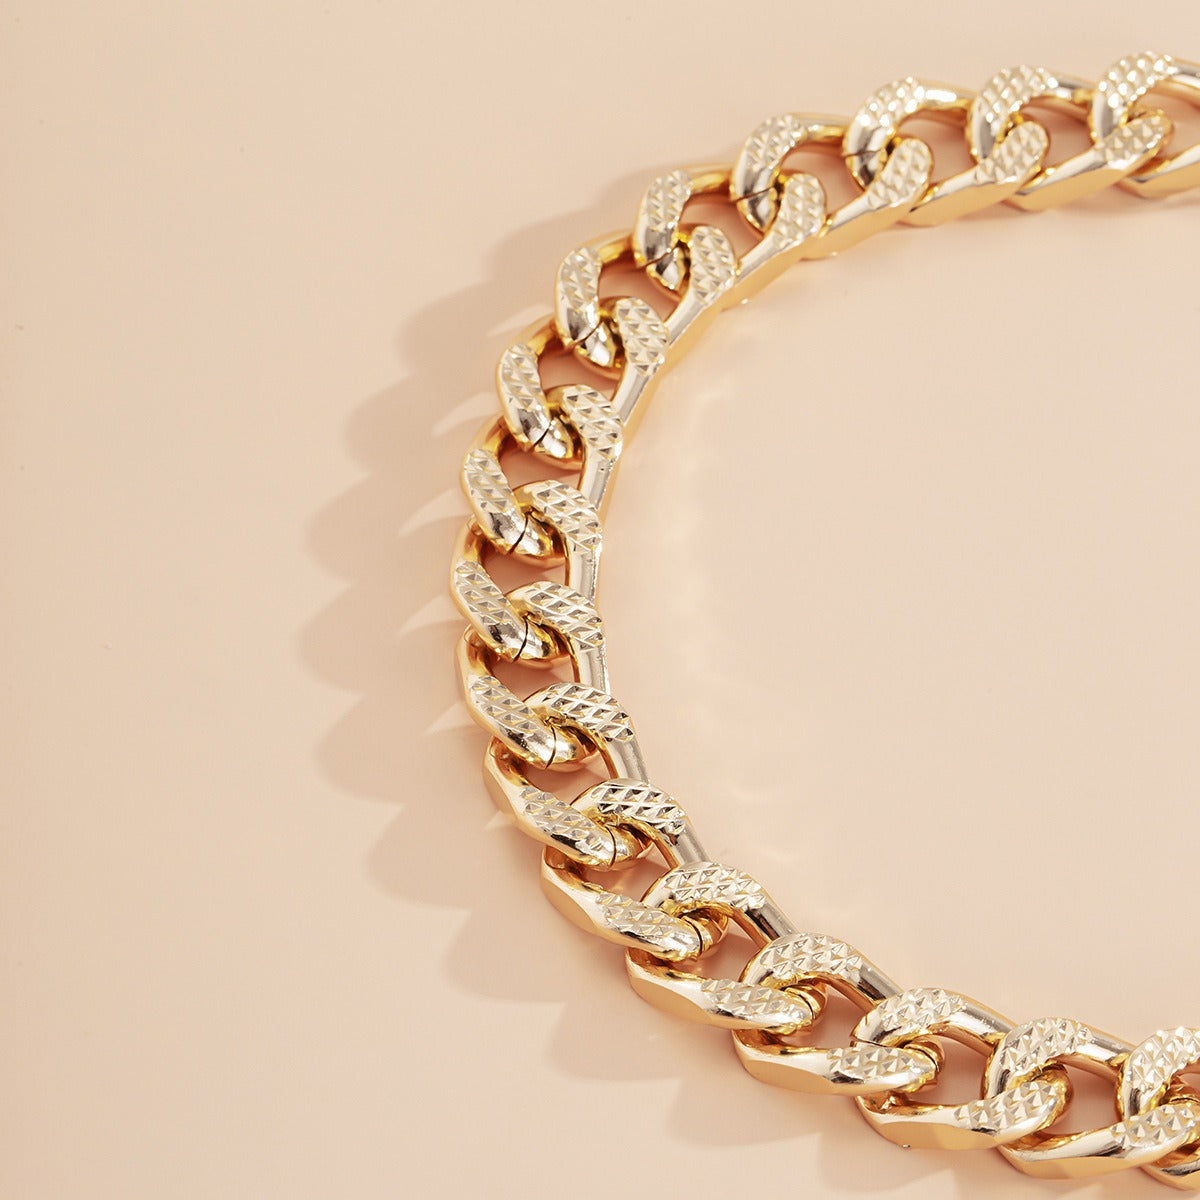 Minimalist Pitted Metal Single Layer Chain Necklace